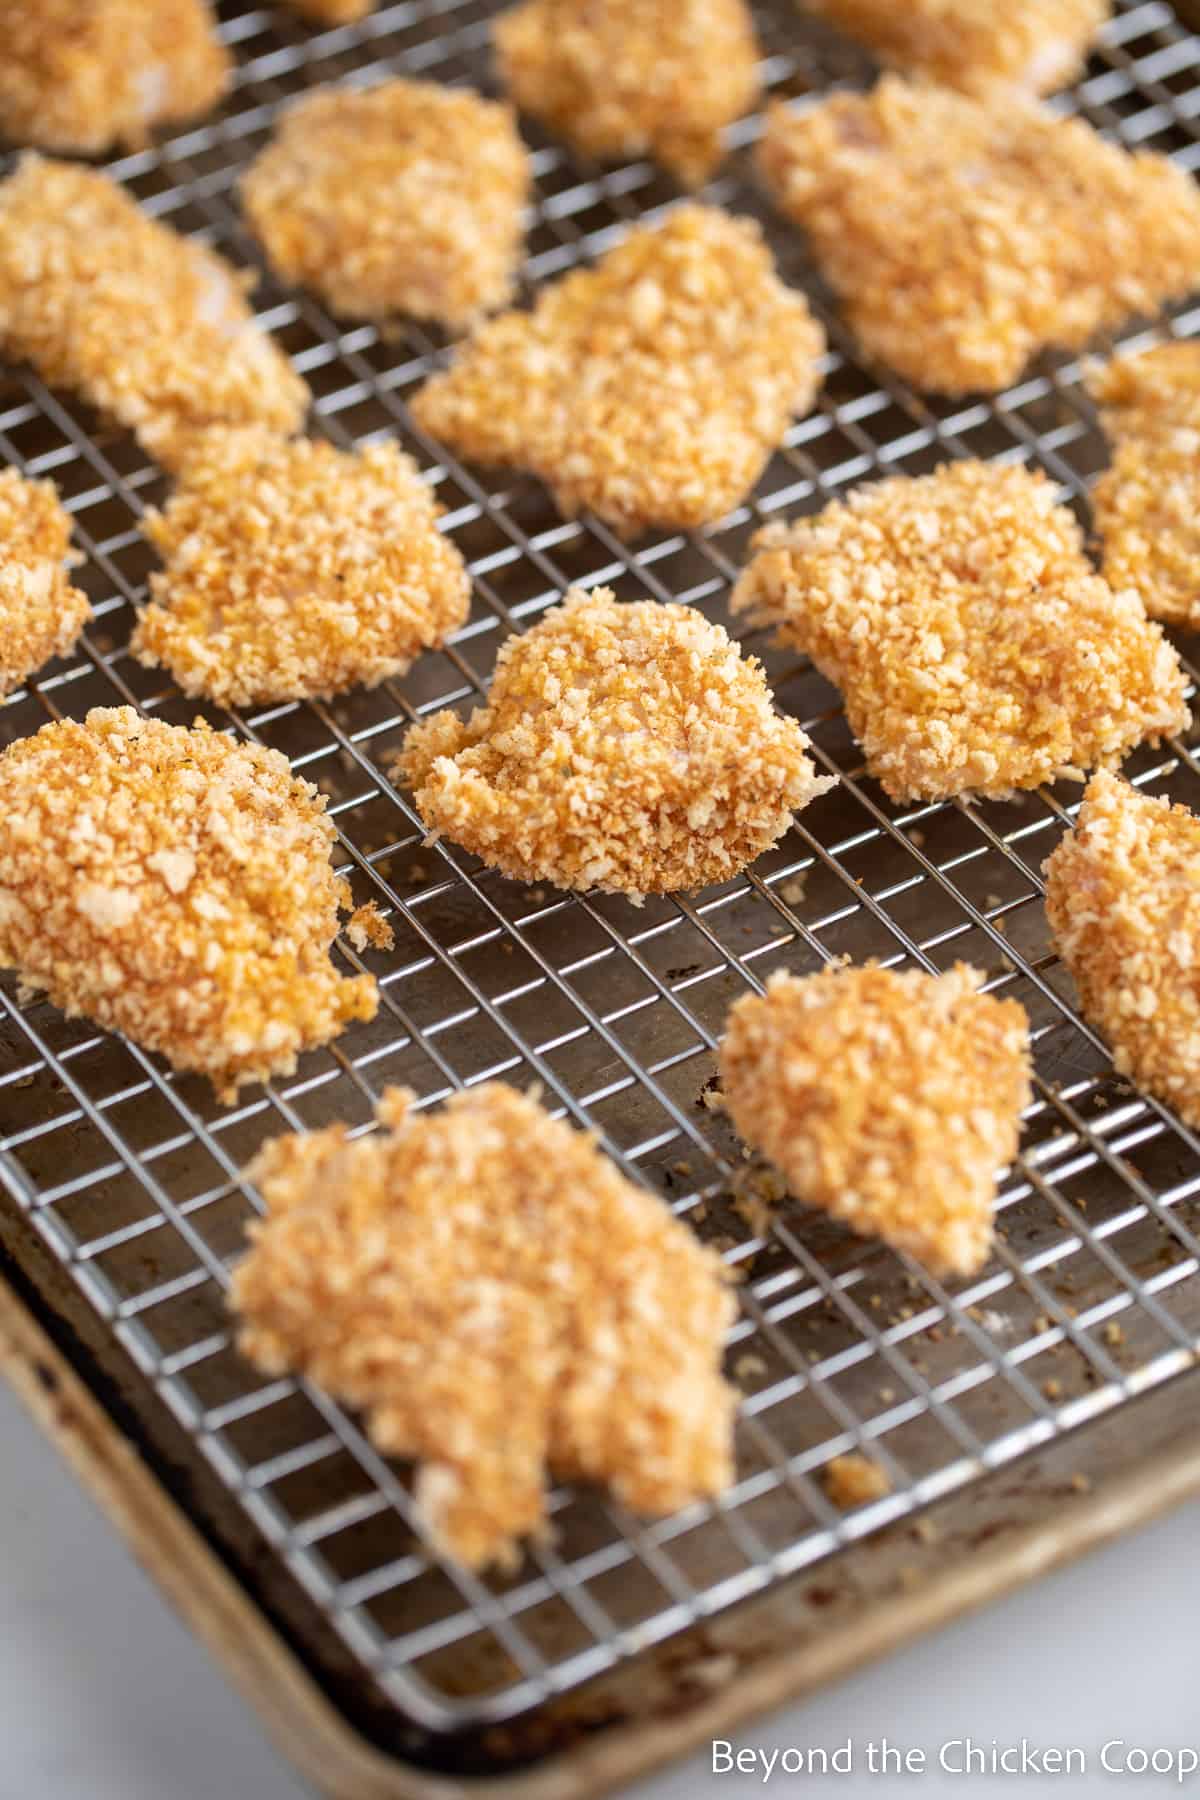 Unbaked chicken nuggets on a baking rack. 